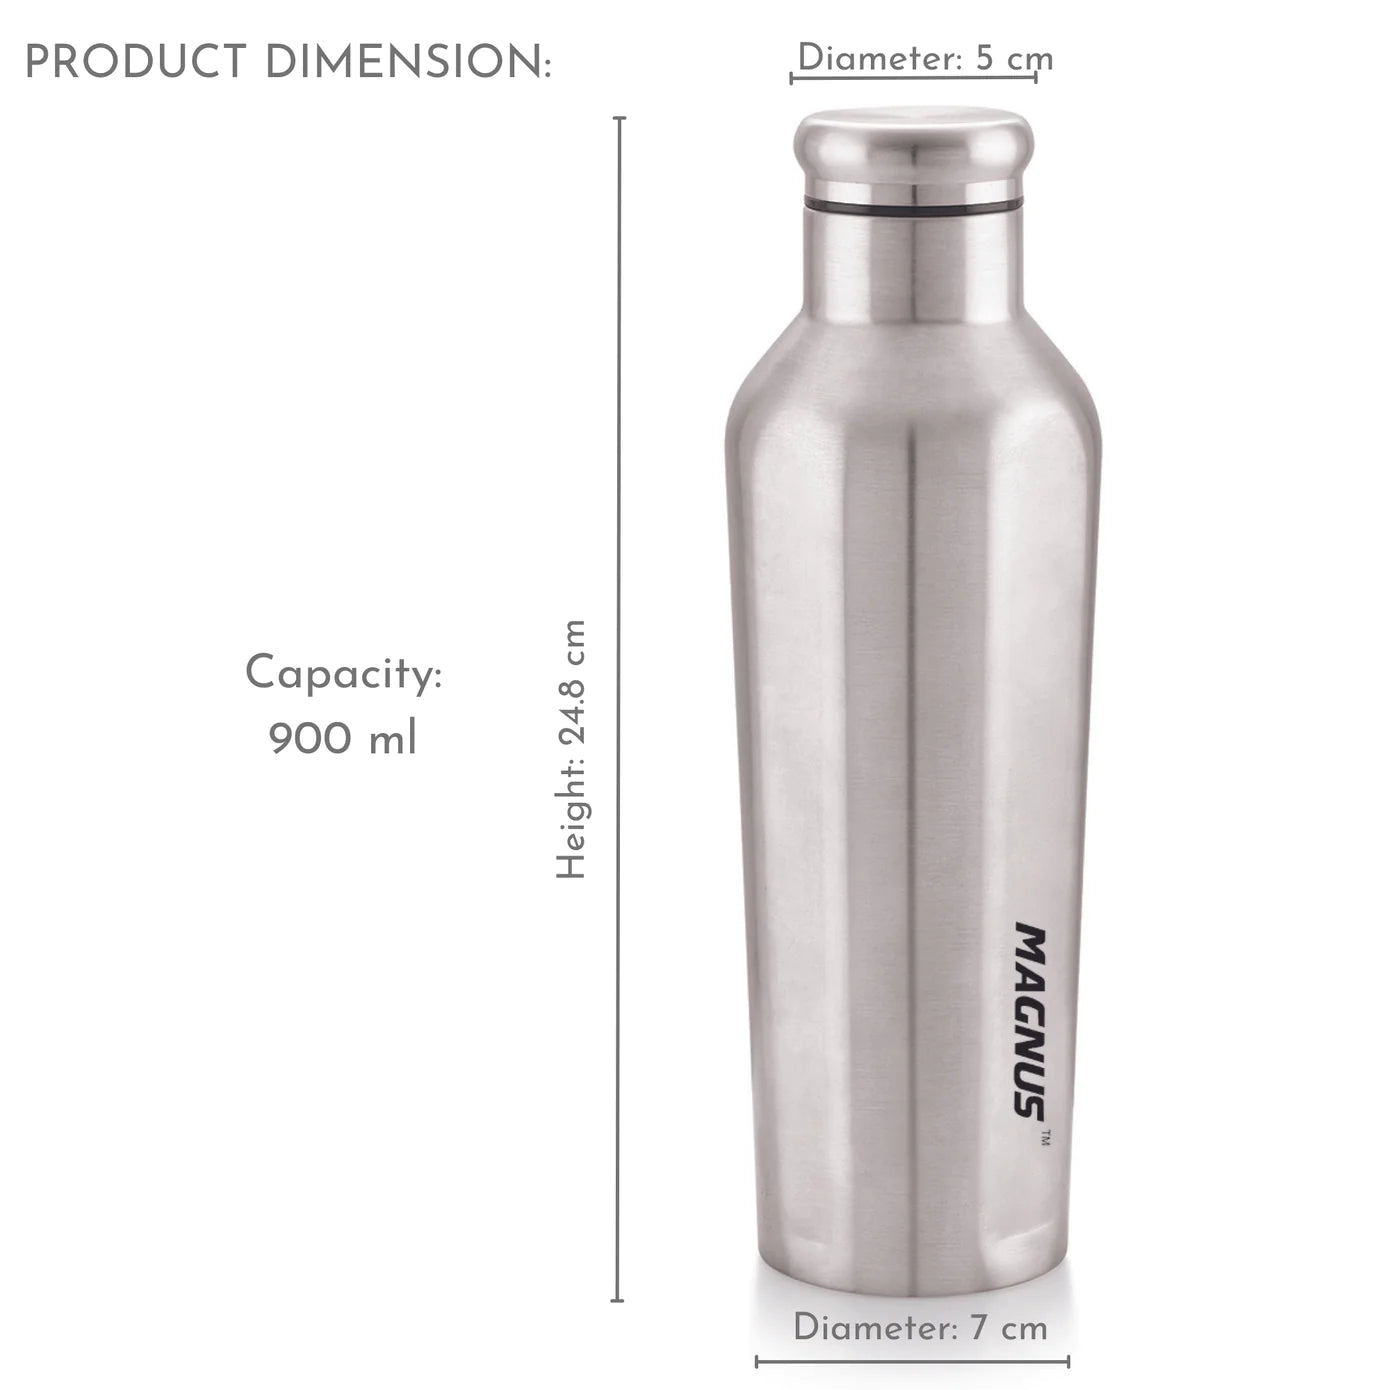 2 Deluxe Stainless Steel LunchBox with Stainless Steel Bottle (900ml)